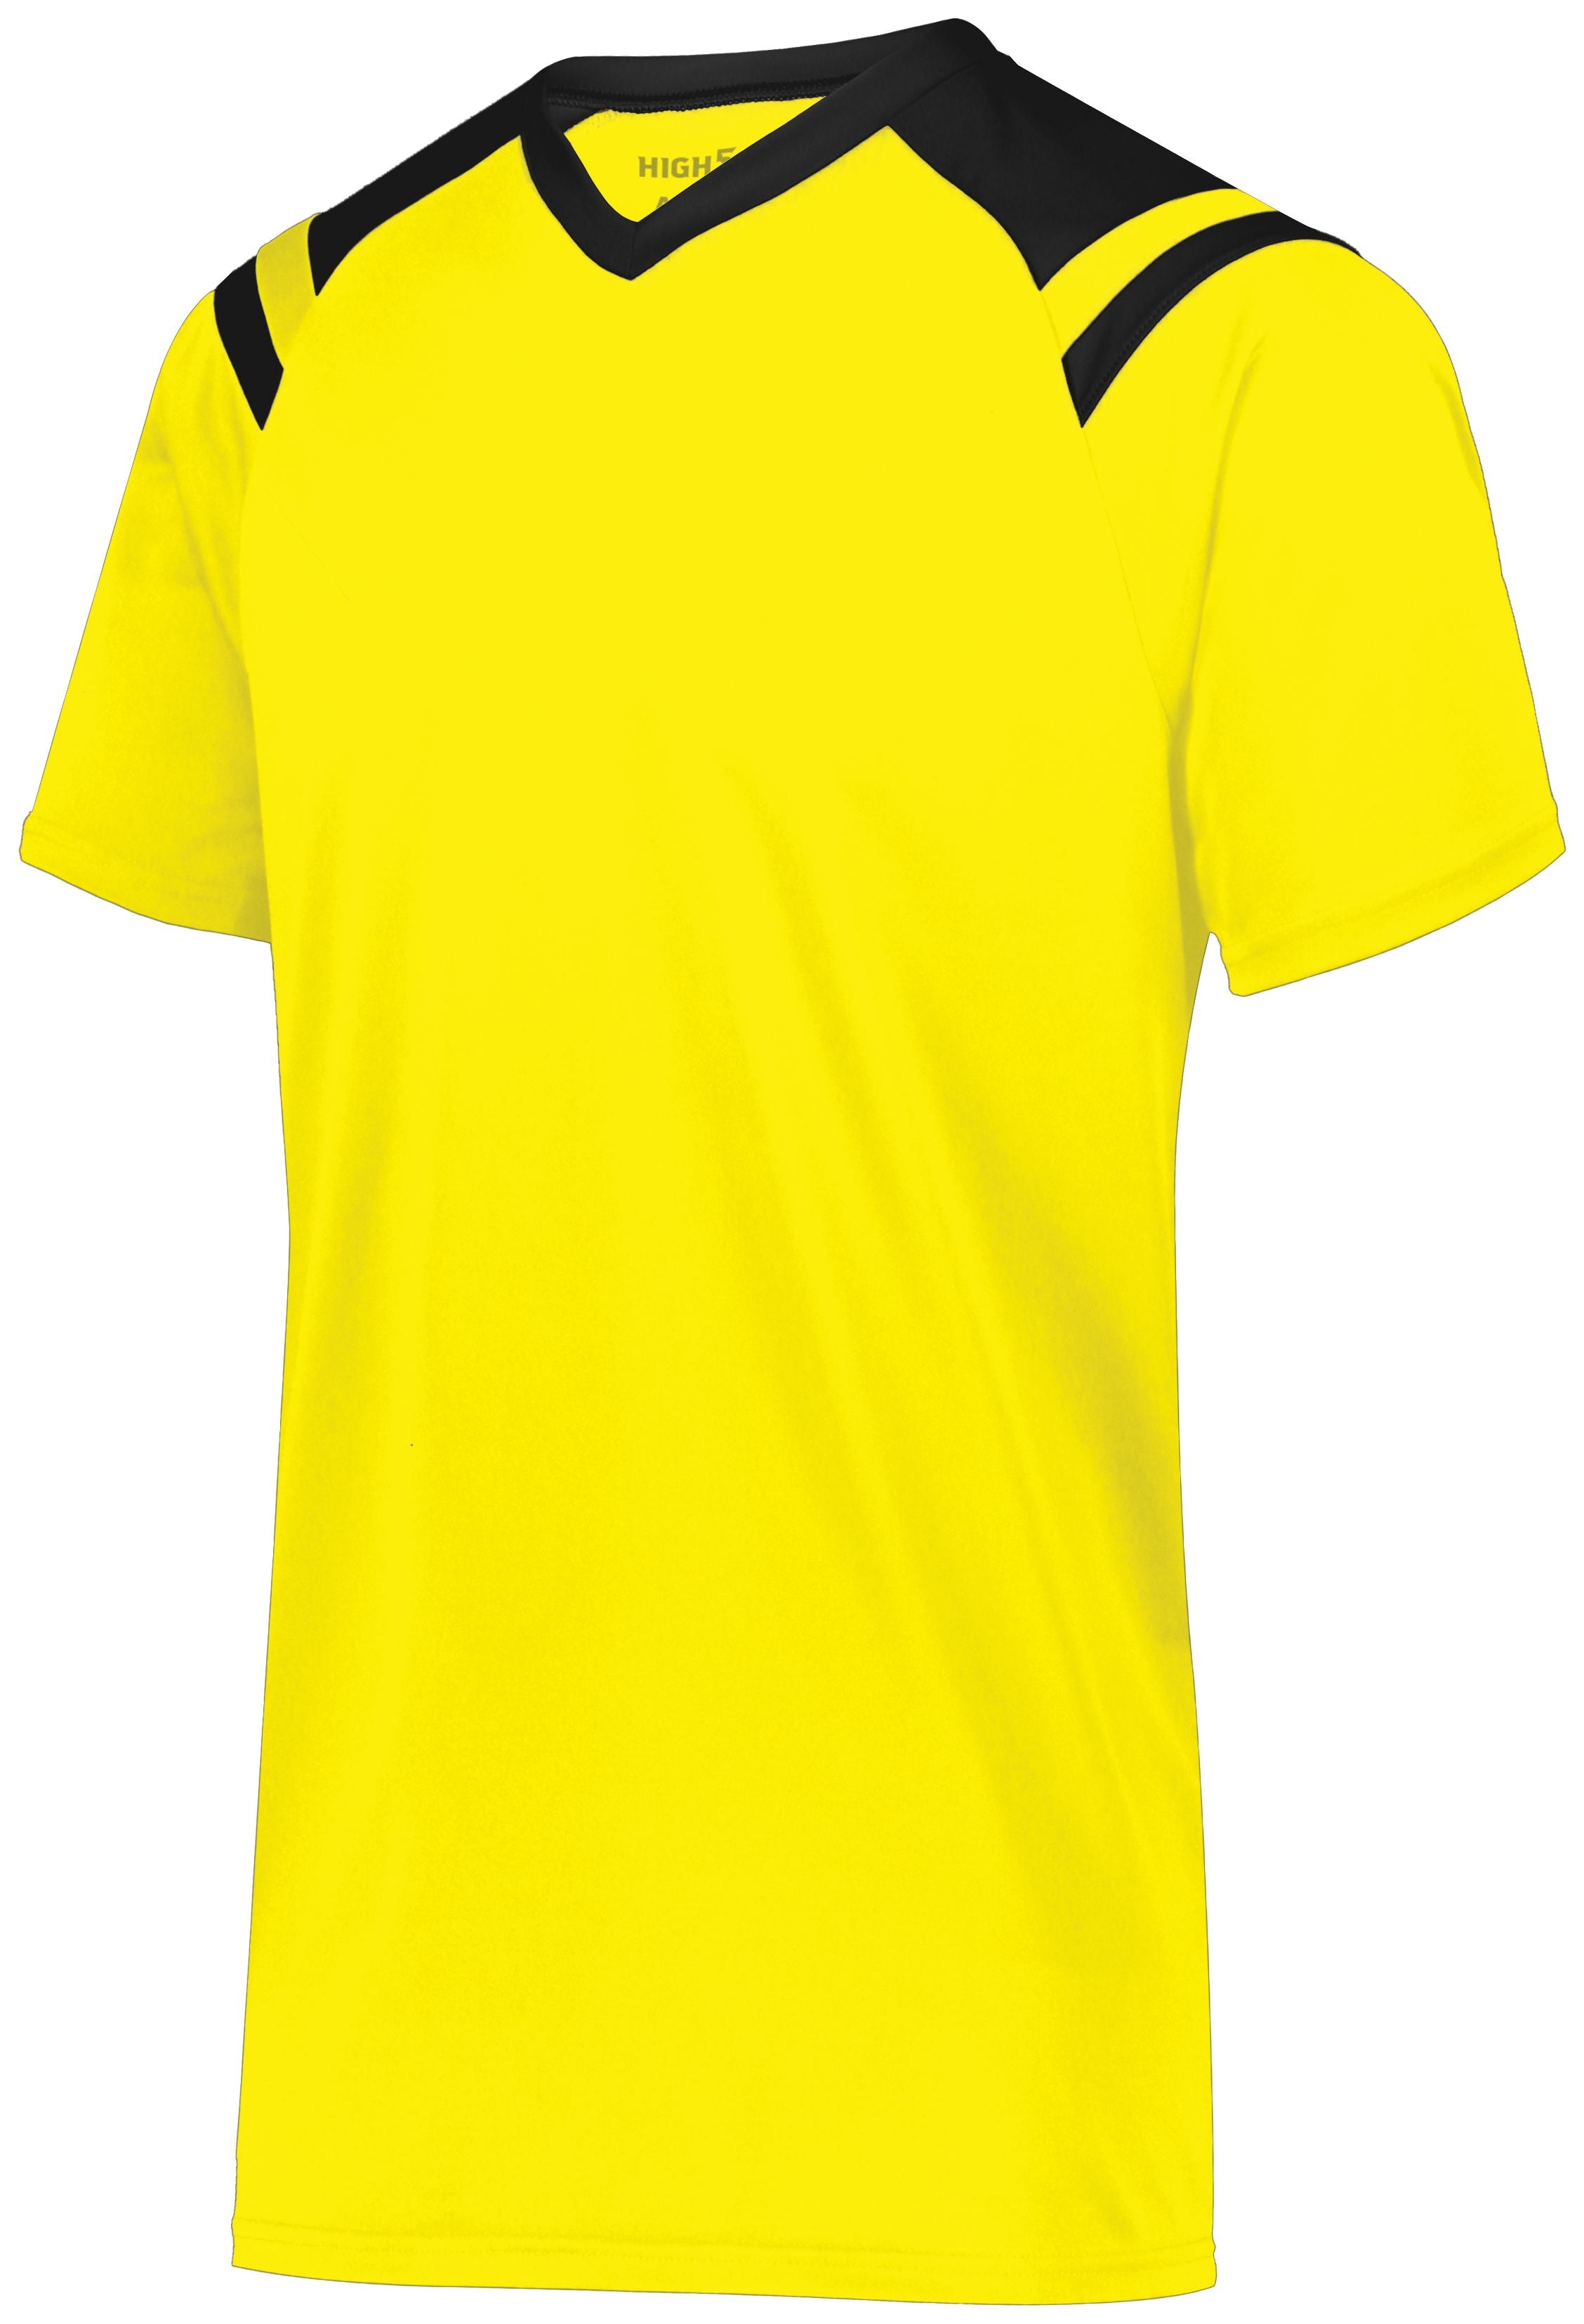 High 5 Sheffield Jersey in Electric Yellow/Black  -Part of the Adult, Adult-Jersey, High5-Products, Soccer, Shirts, All-Sports-1, Sheffield-Soccer-Jerseys product lines at KanaleyCreations.com